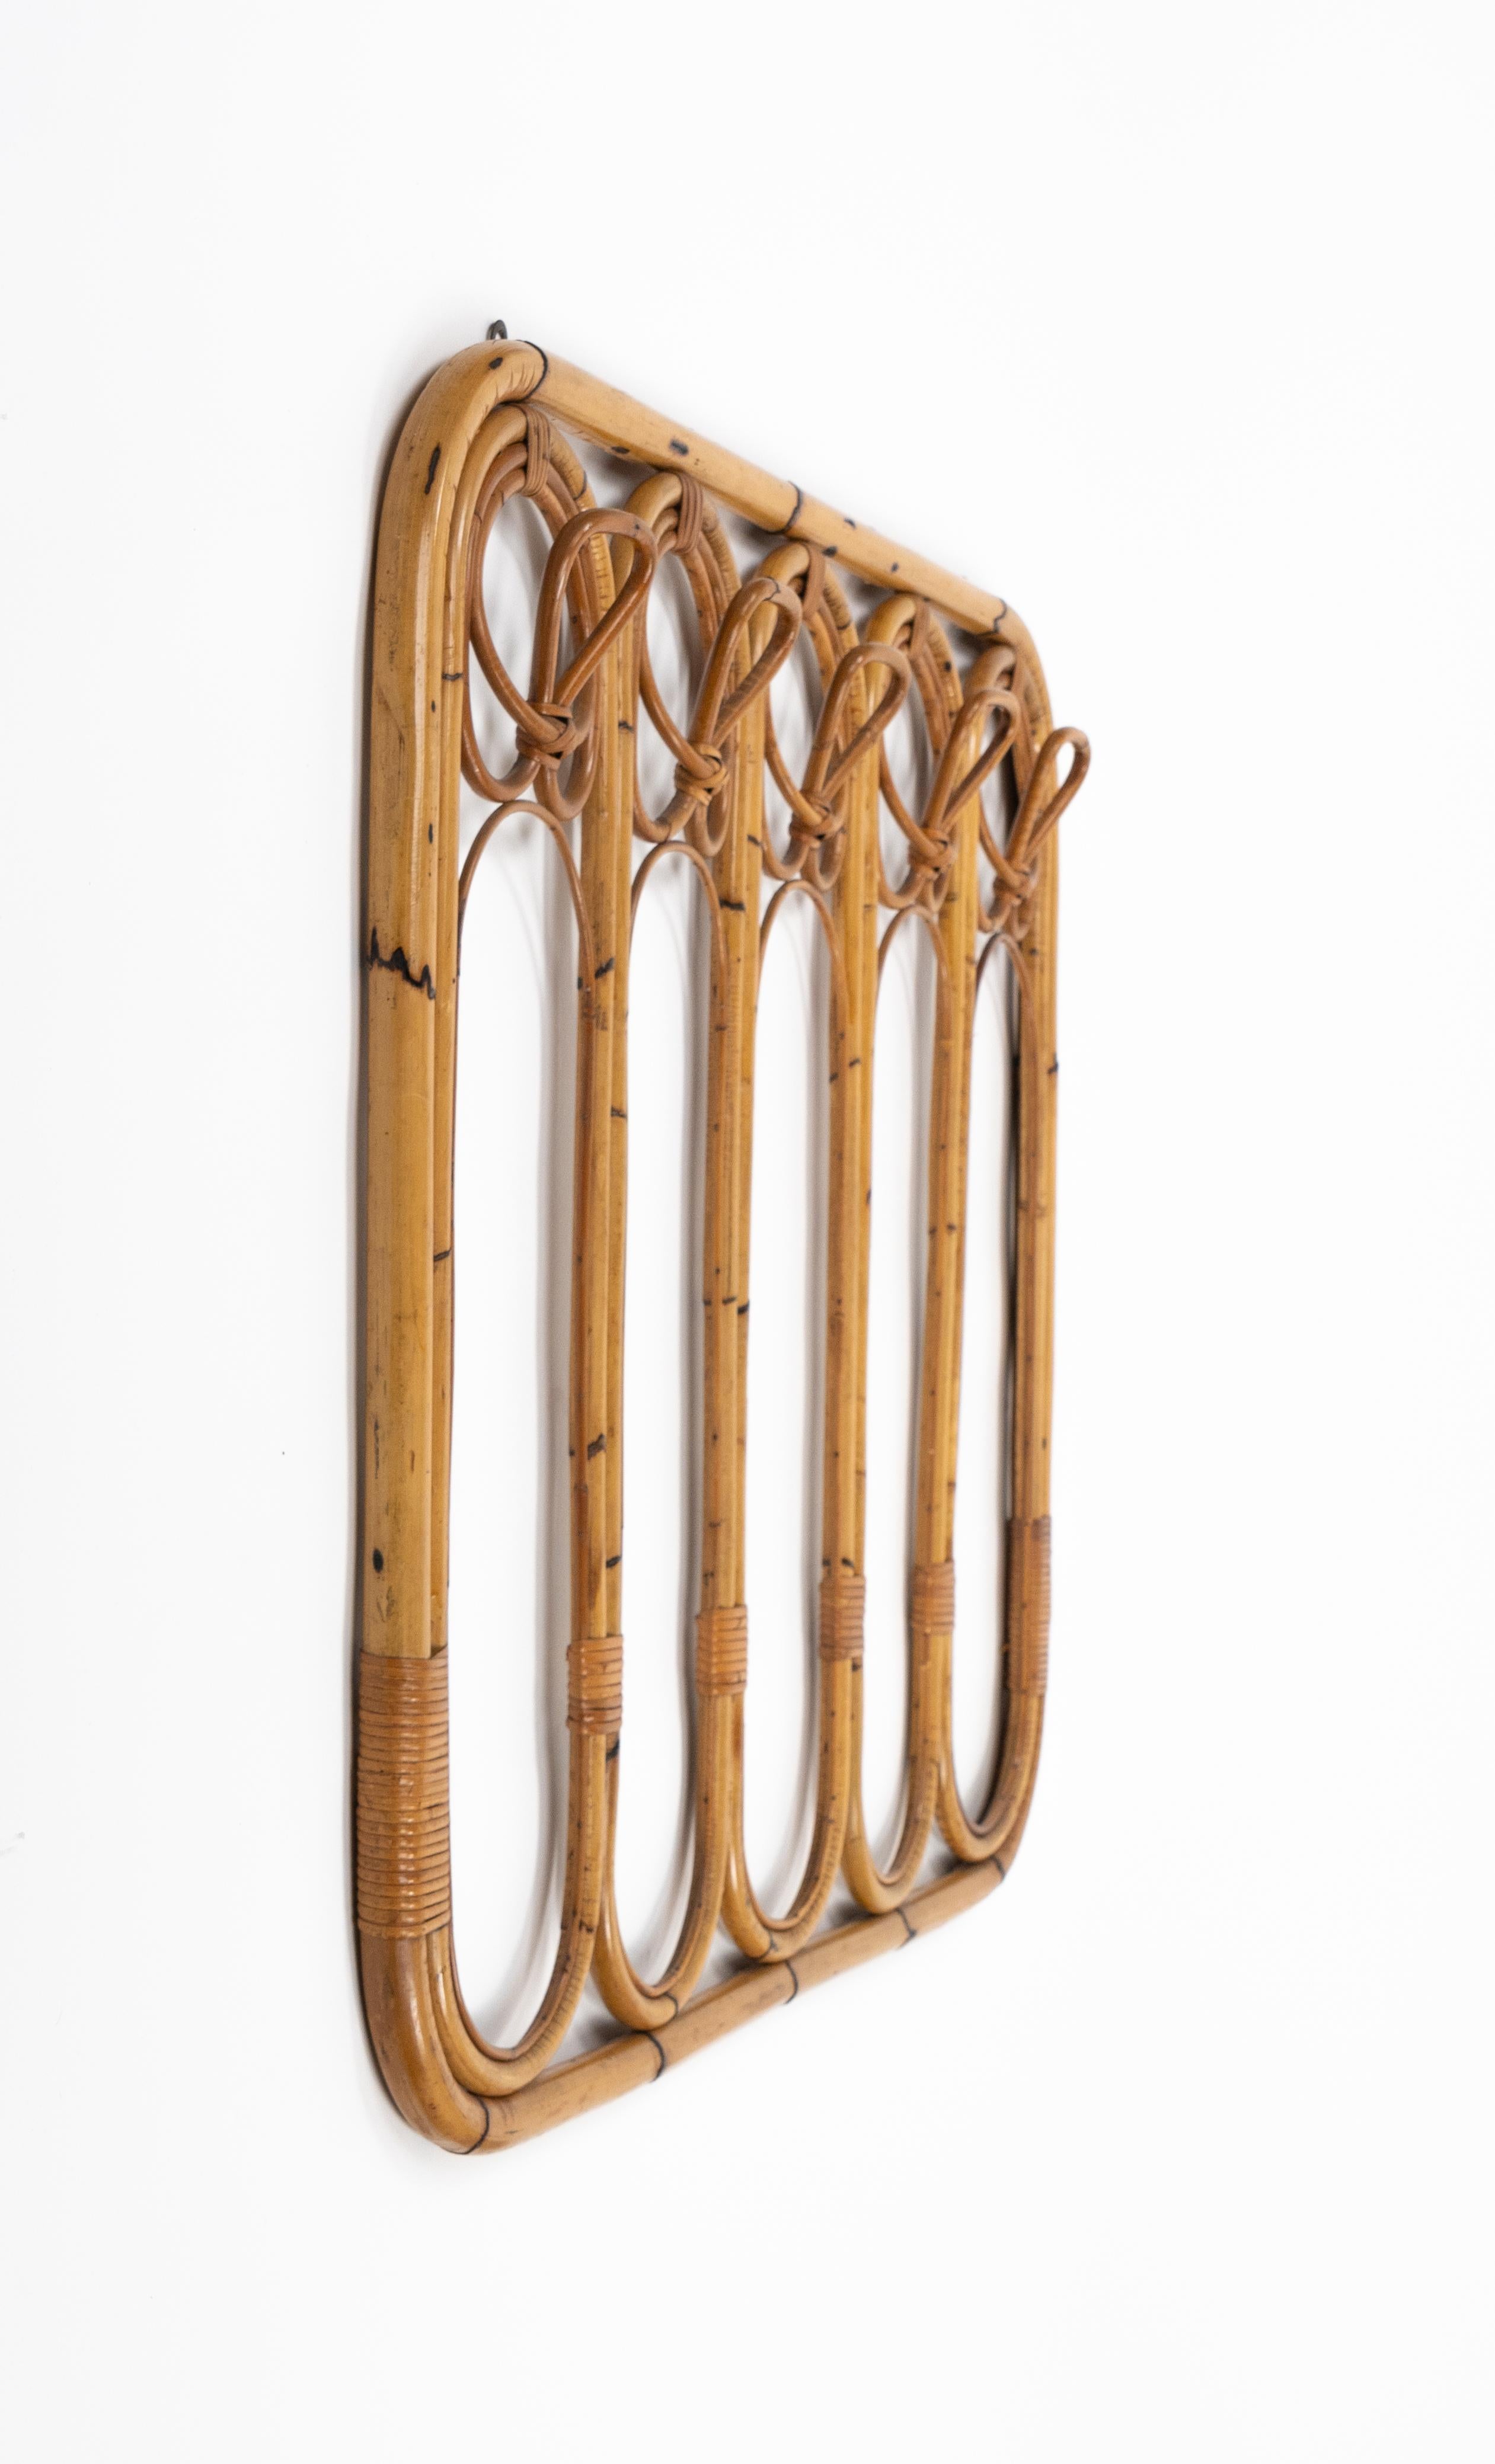 Italian Midcentury Bamboo and Rattan Coat Rack Stand, Italy 1960s For Sale